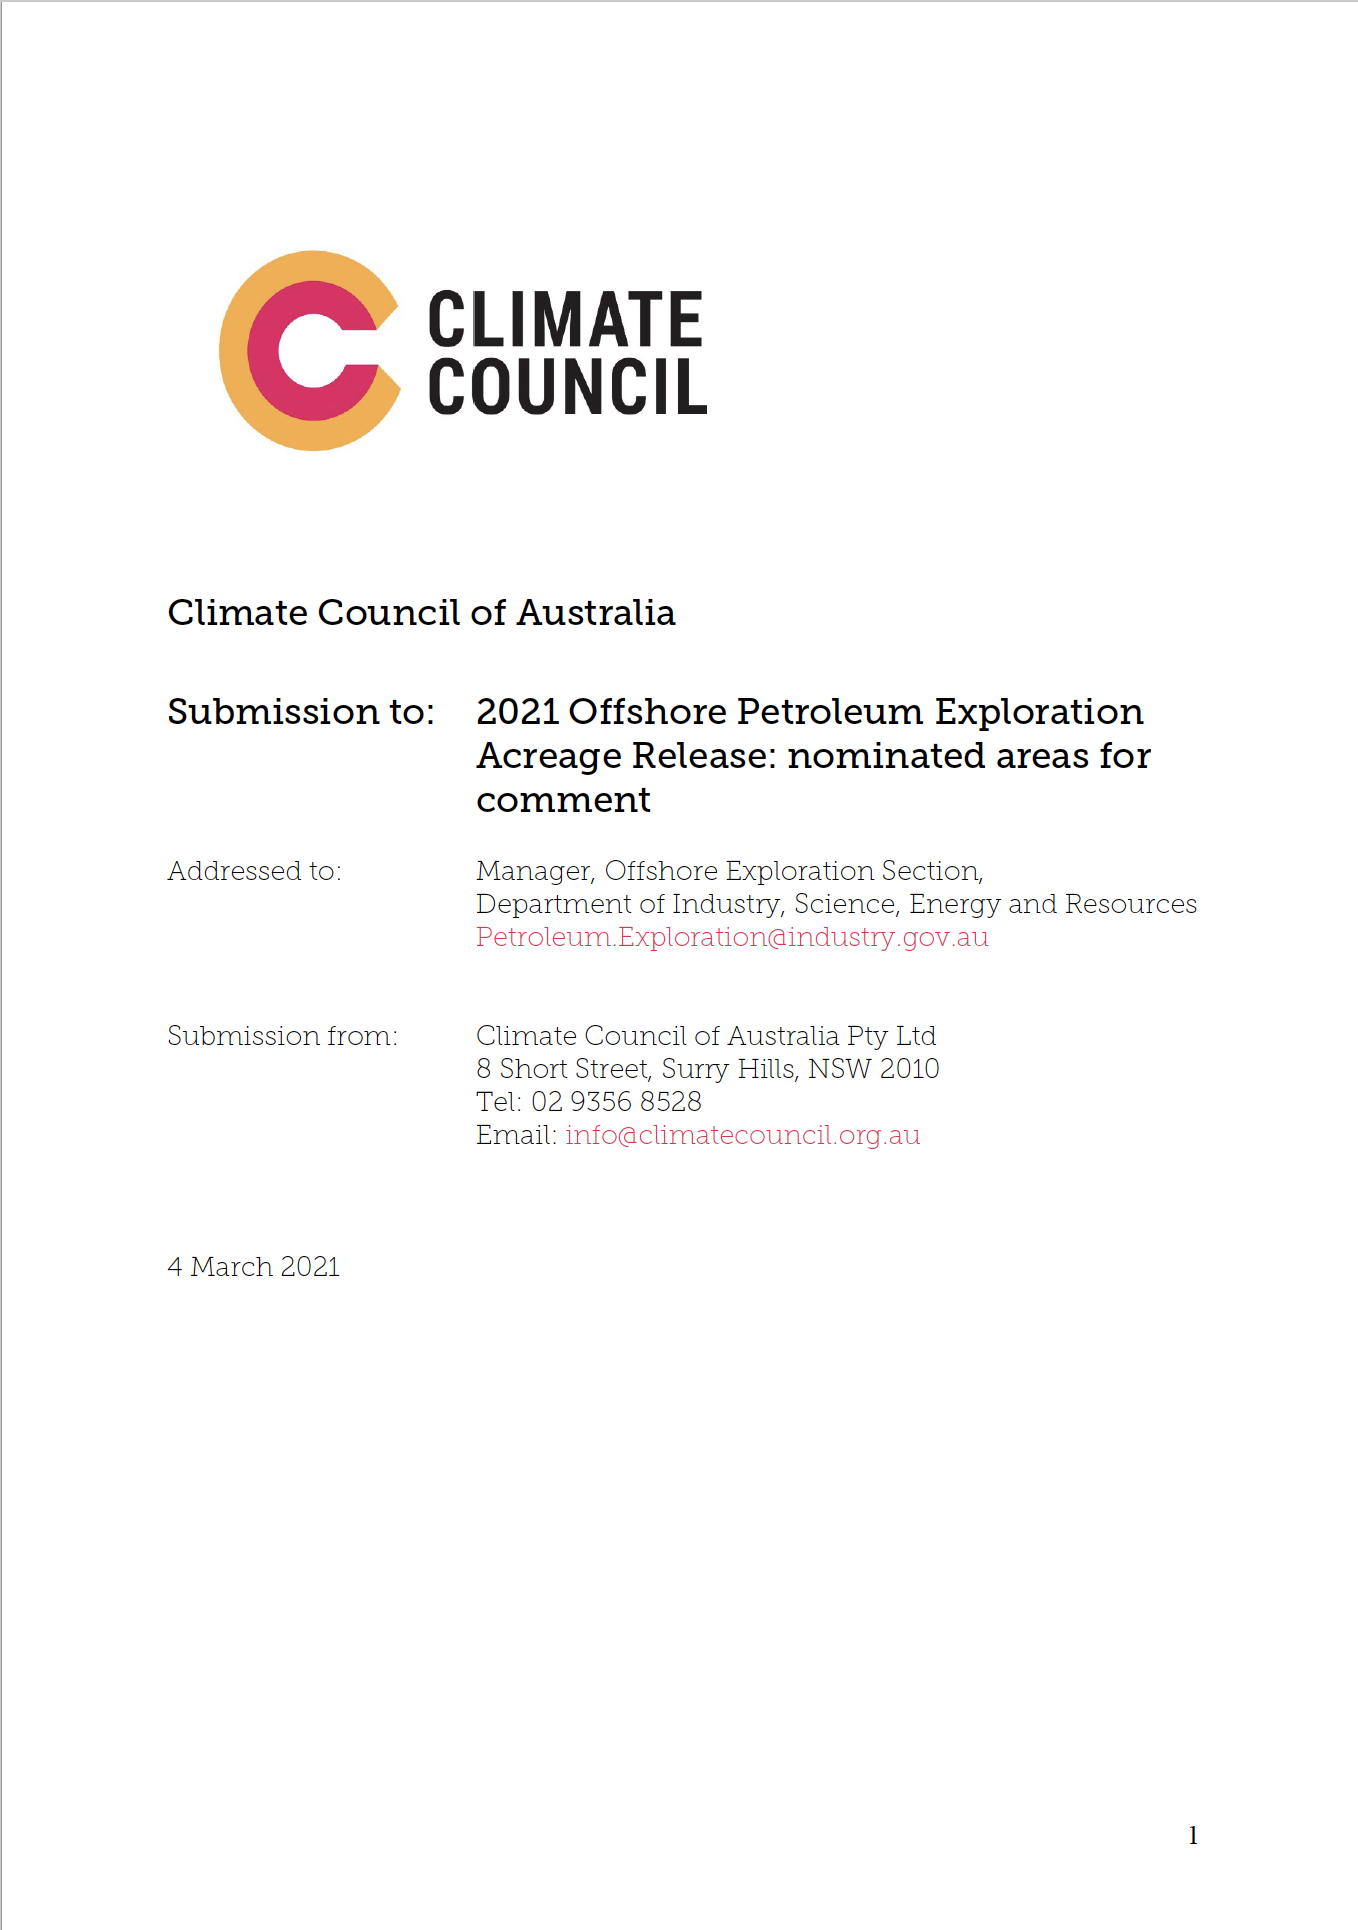 The cover page of the submission to 2021 Offshore Petroleum Exploration Acreage Release: nominated areas for comment.